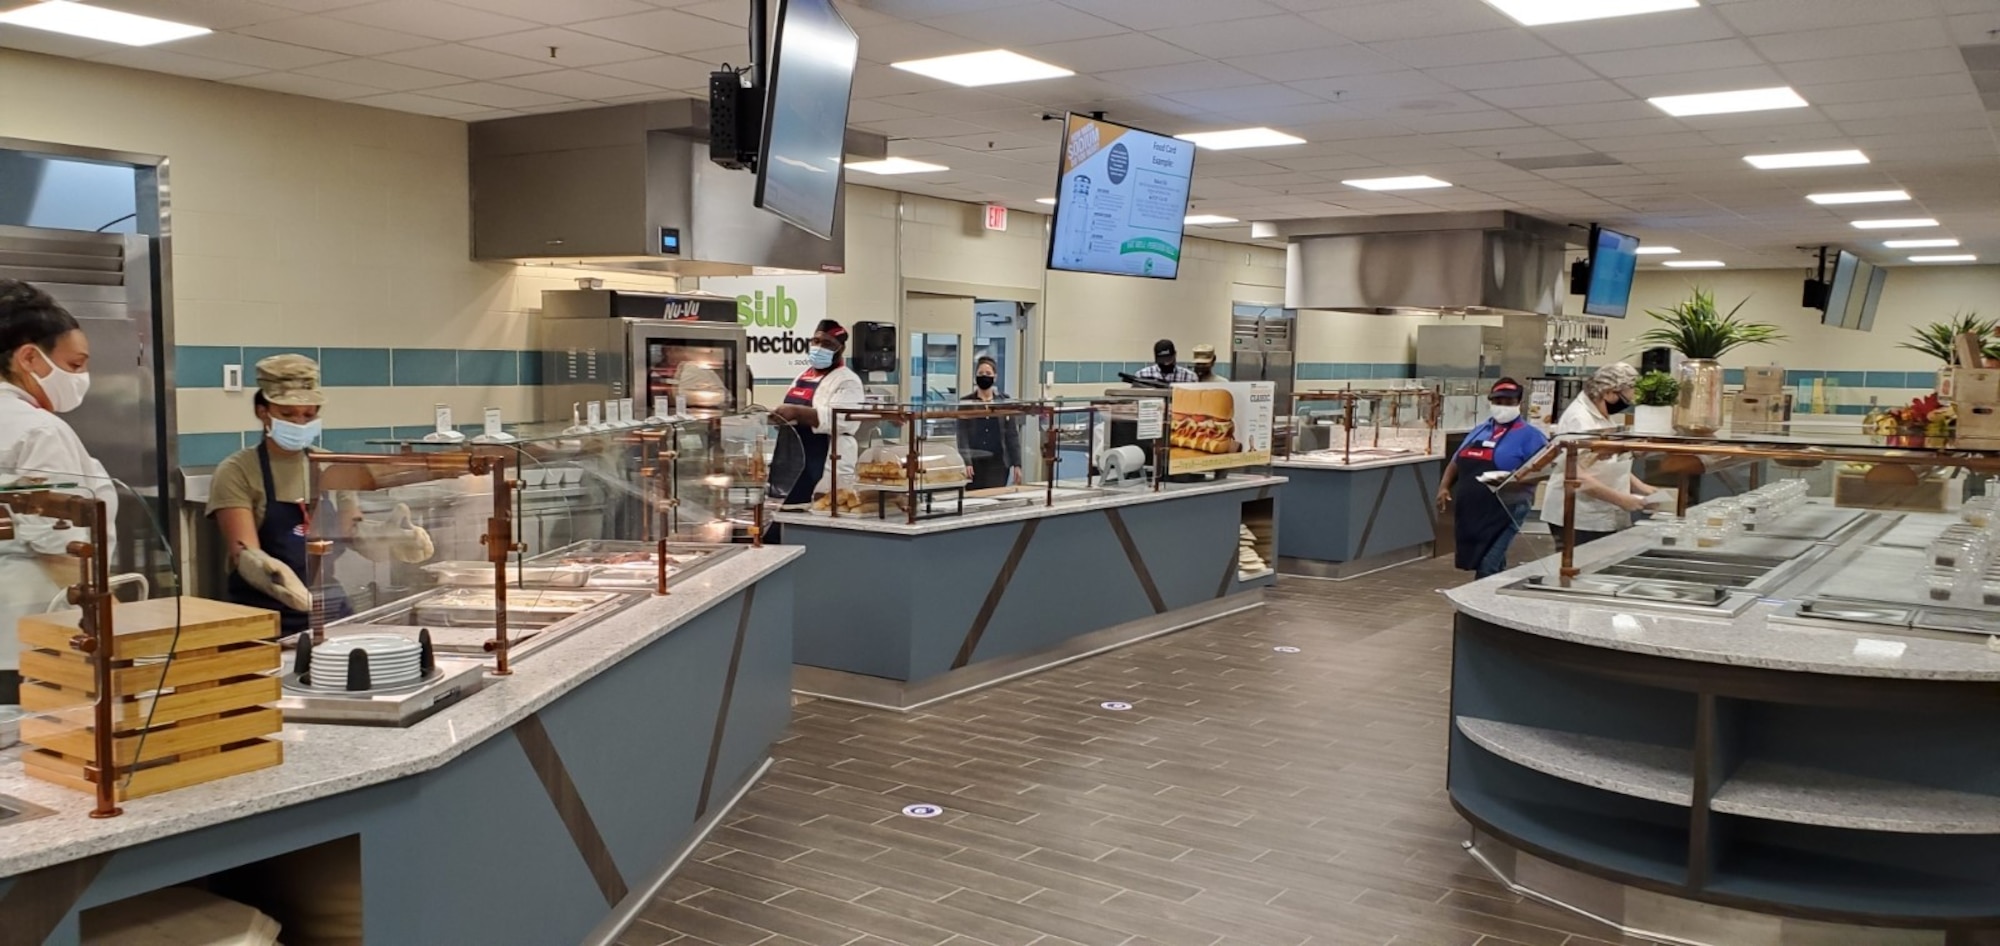 Food 2.0 brings healthier dining options to Seymour-Johnson